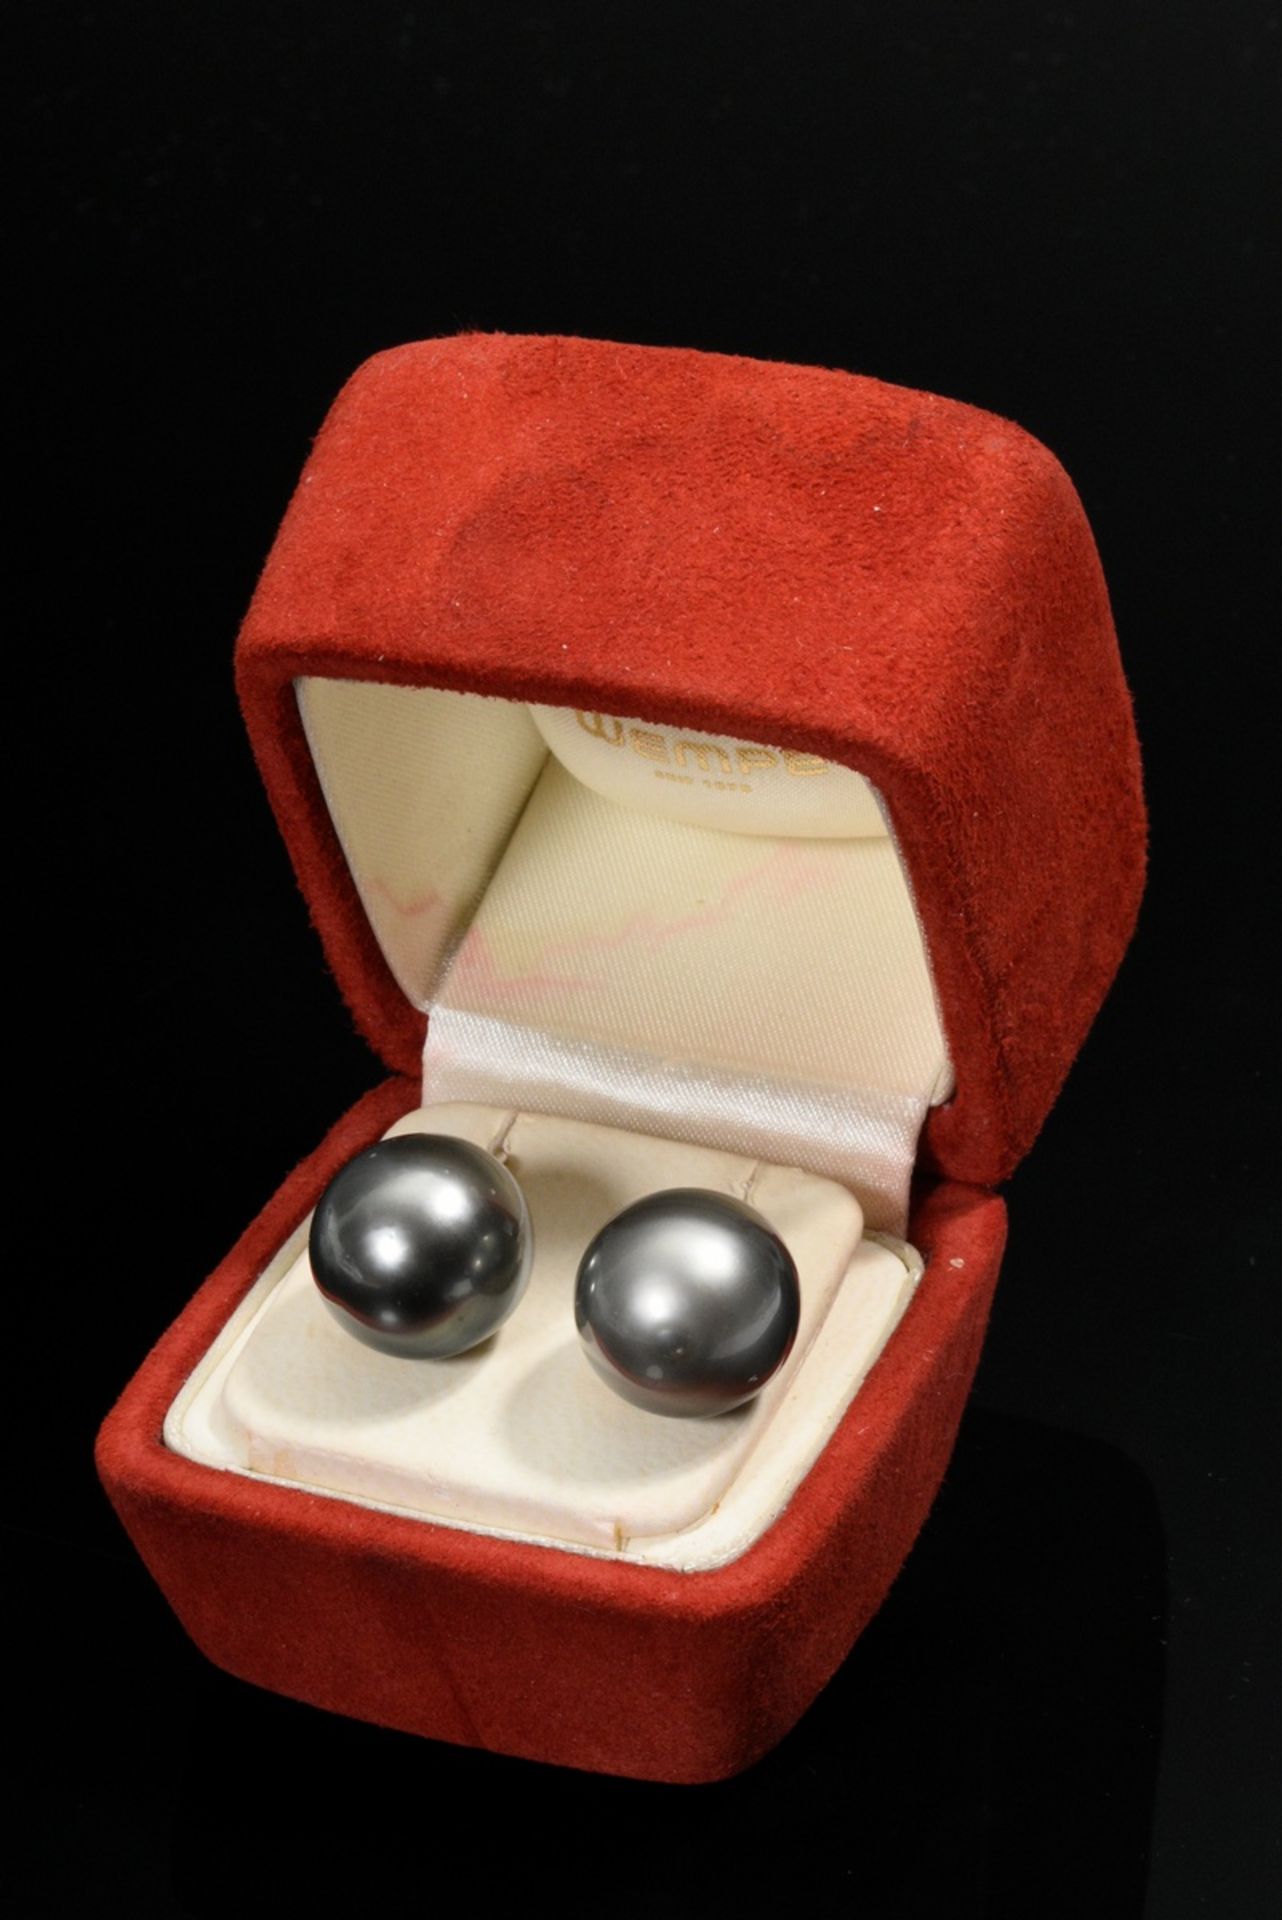 Pair of Wempe 750 white gold earrings with black Tahitian cultured pearl drops, 15.1g, Ø 16.2/16.3m - Image 3 of 3